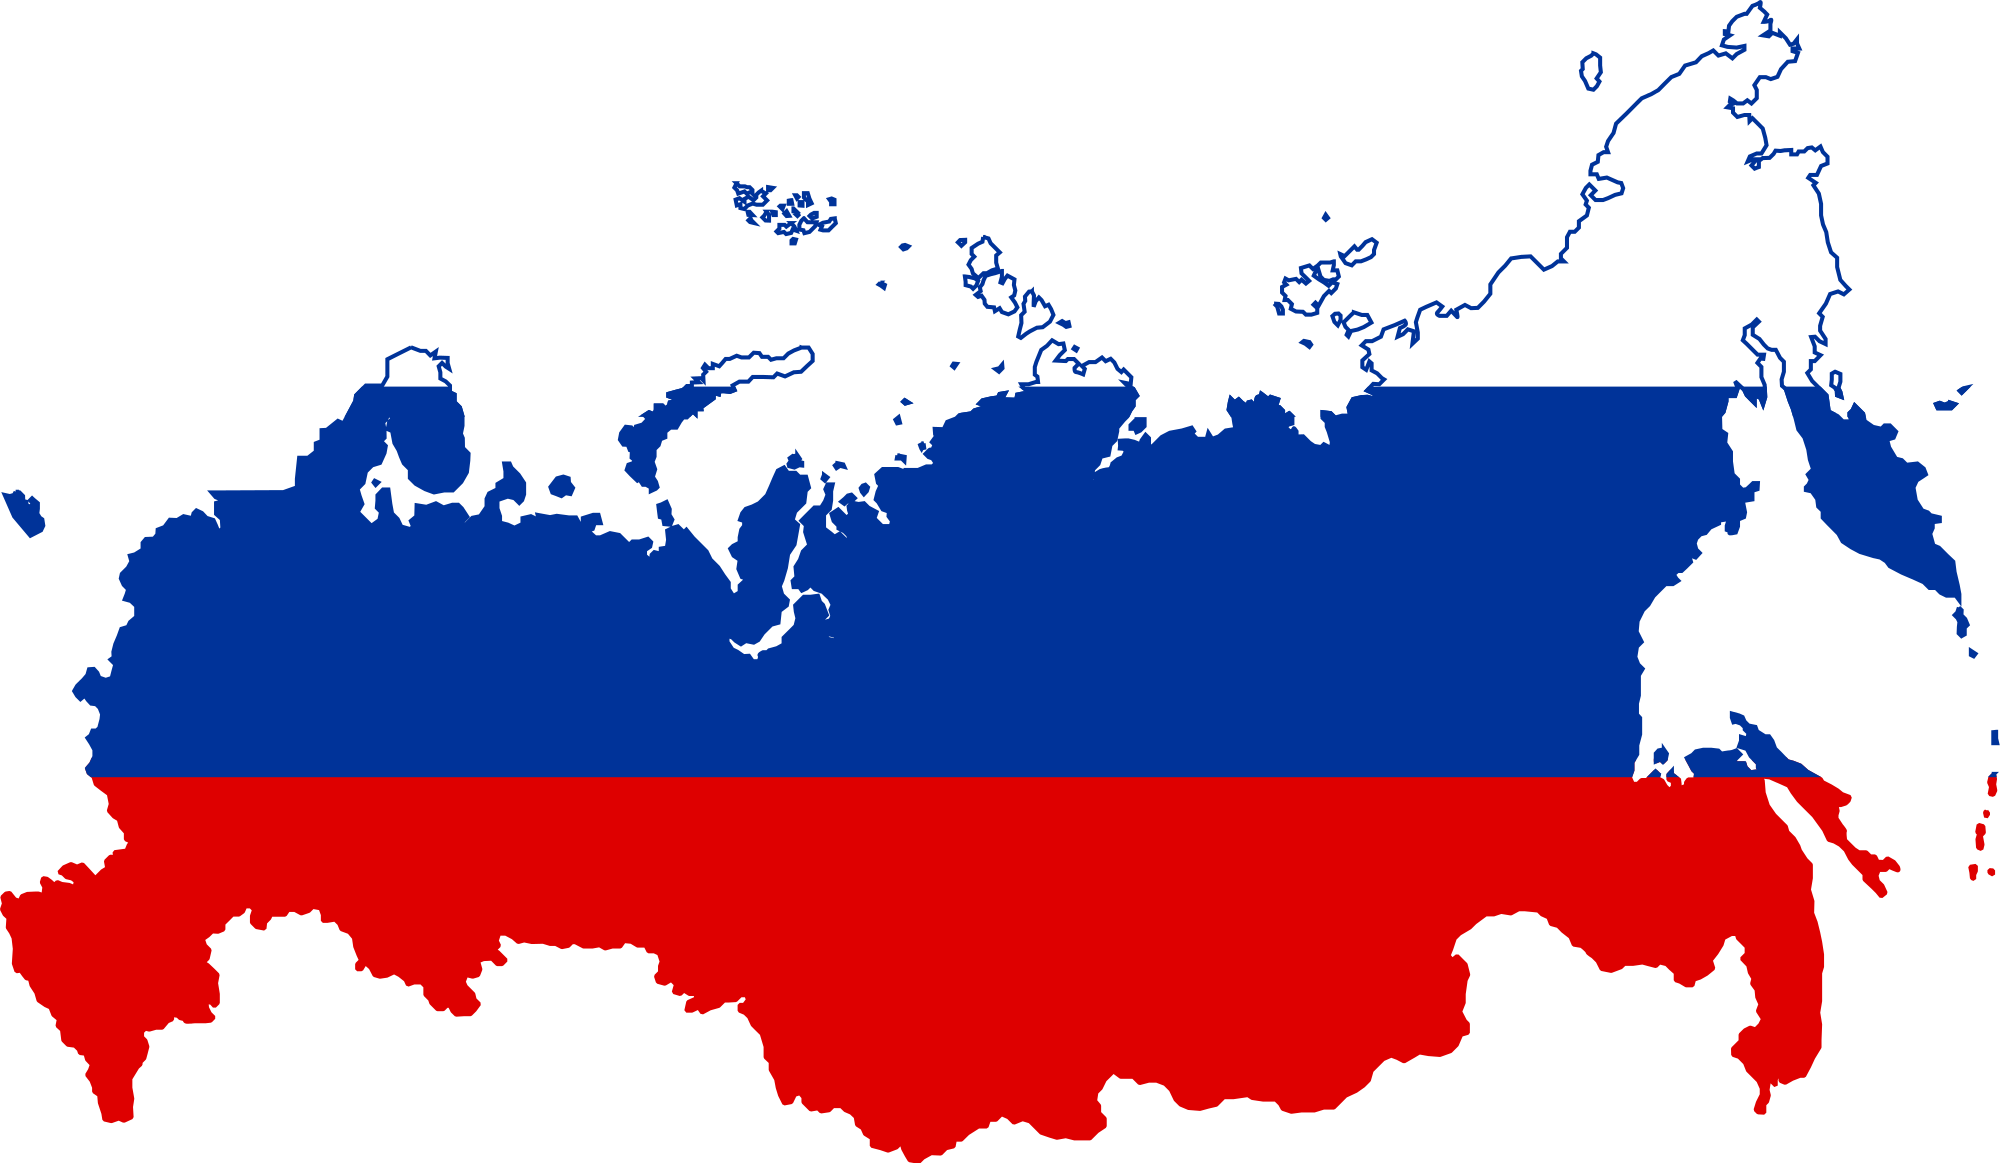 Russia PNG Transparent Image